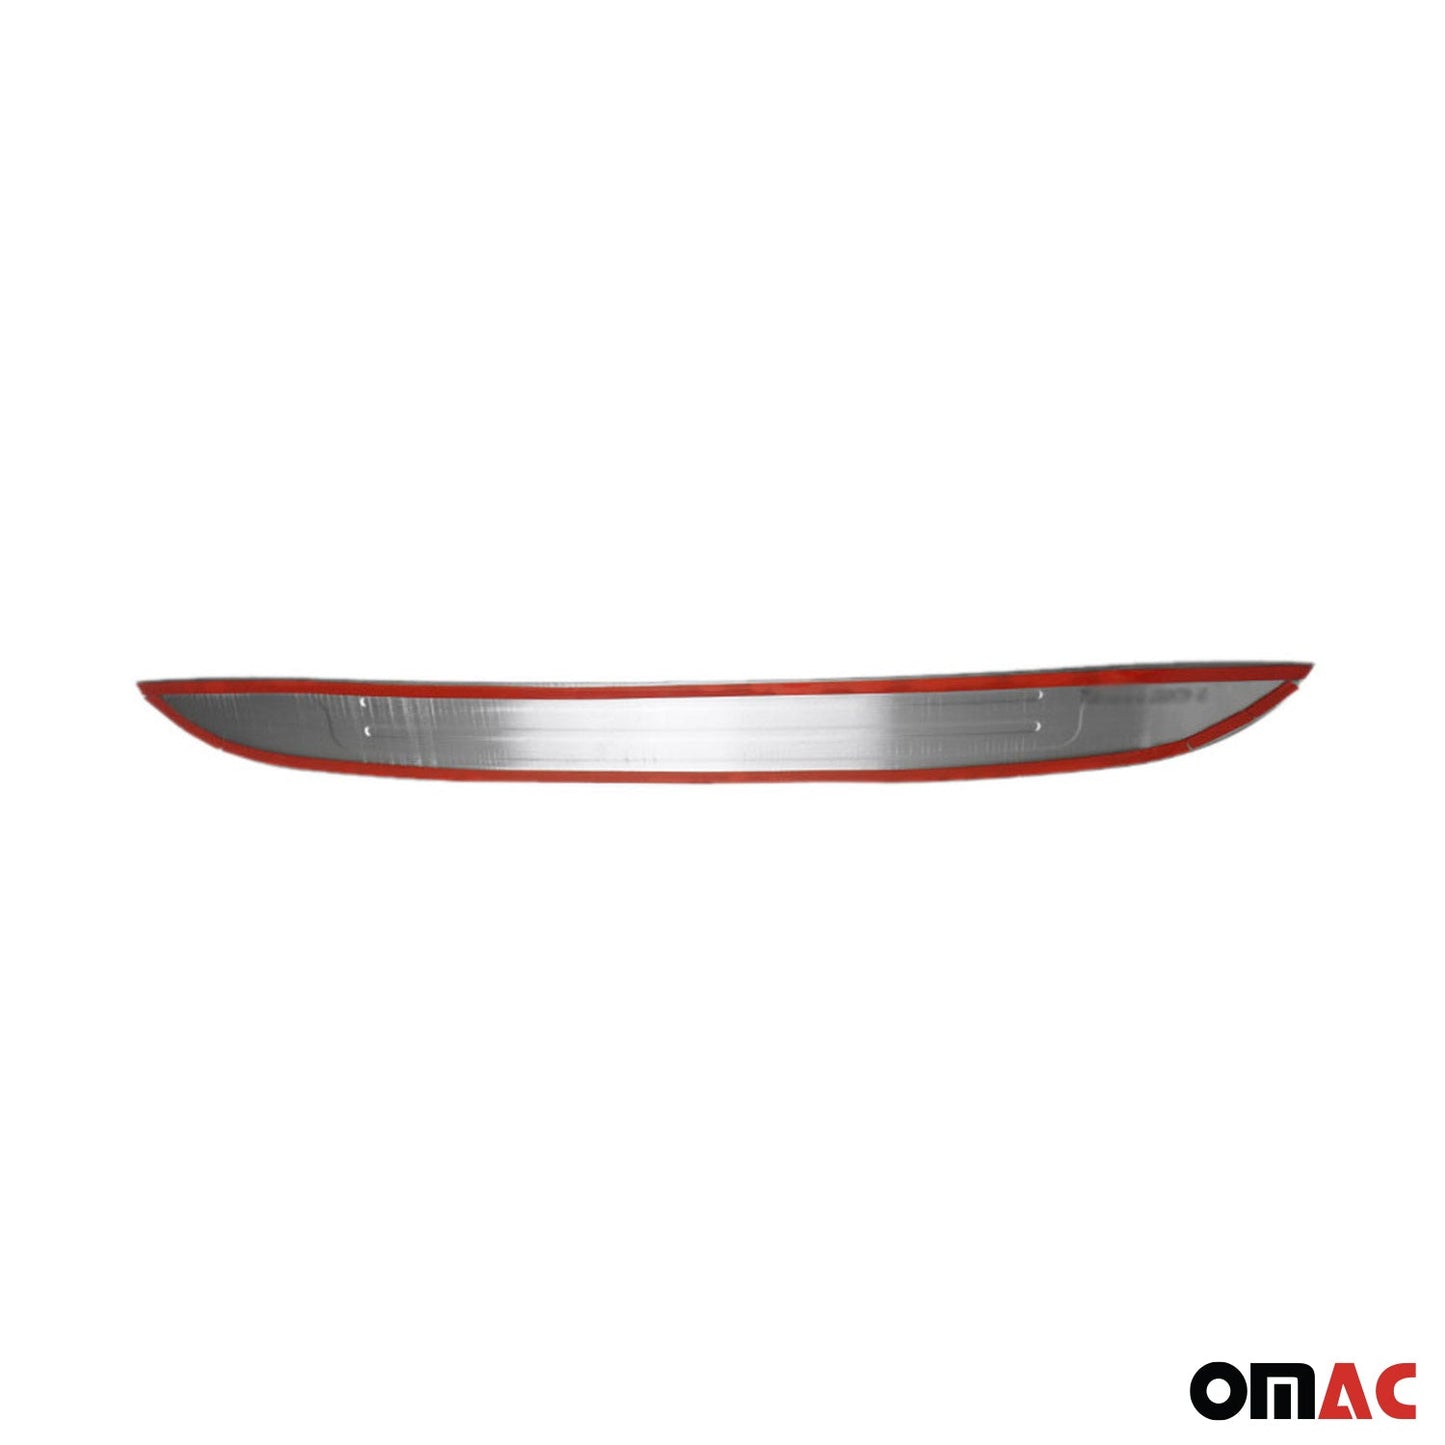 OMAC Rear Bumper Sill Cover Protector Guard for Mazda CX-3 2016-2021 Brushed Steel 4624093T